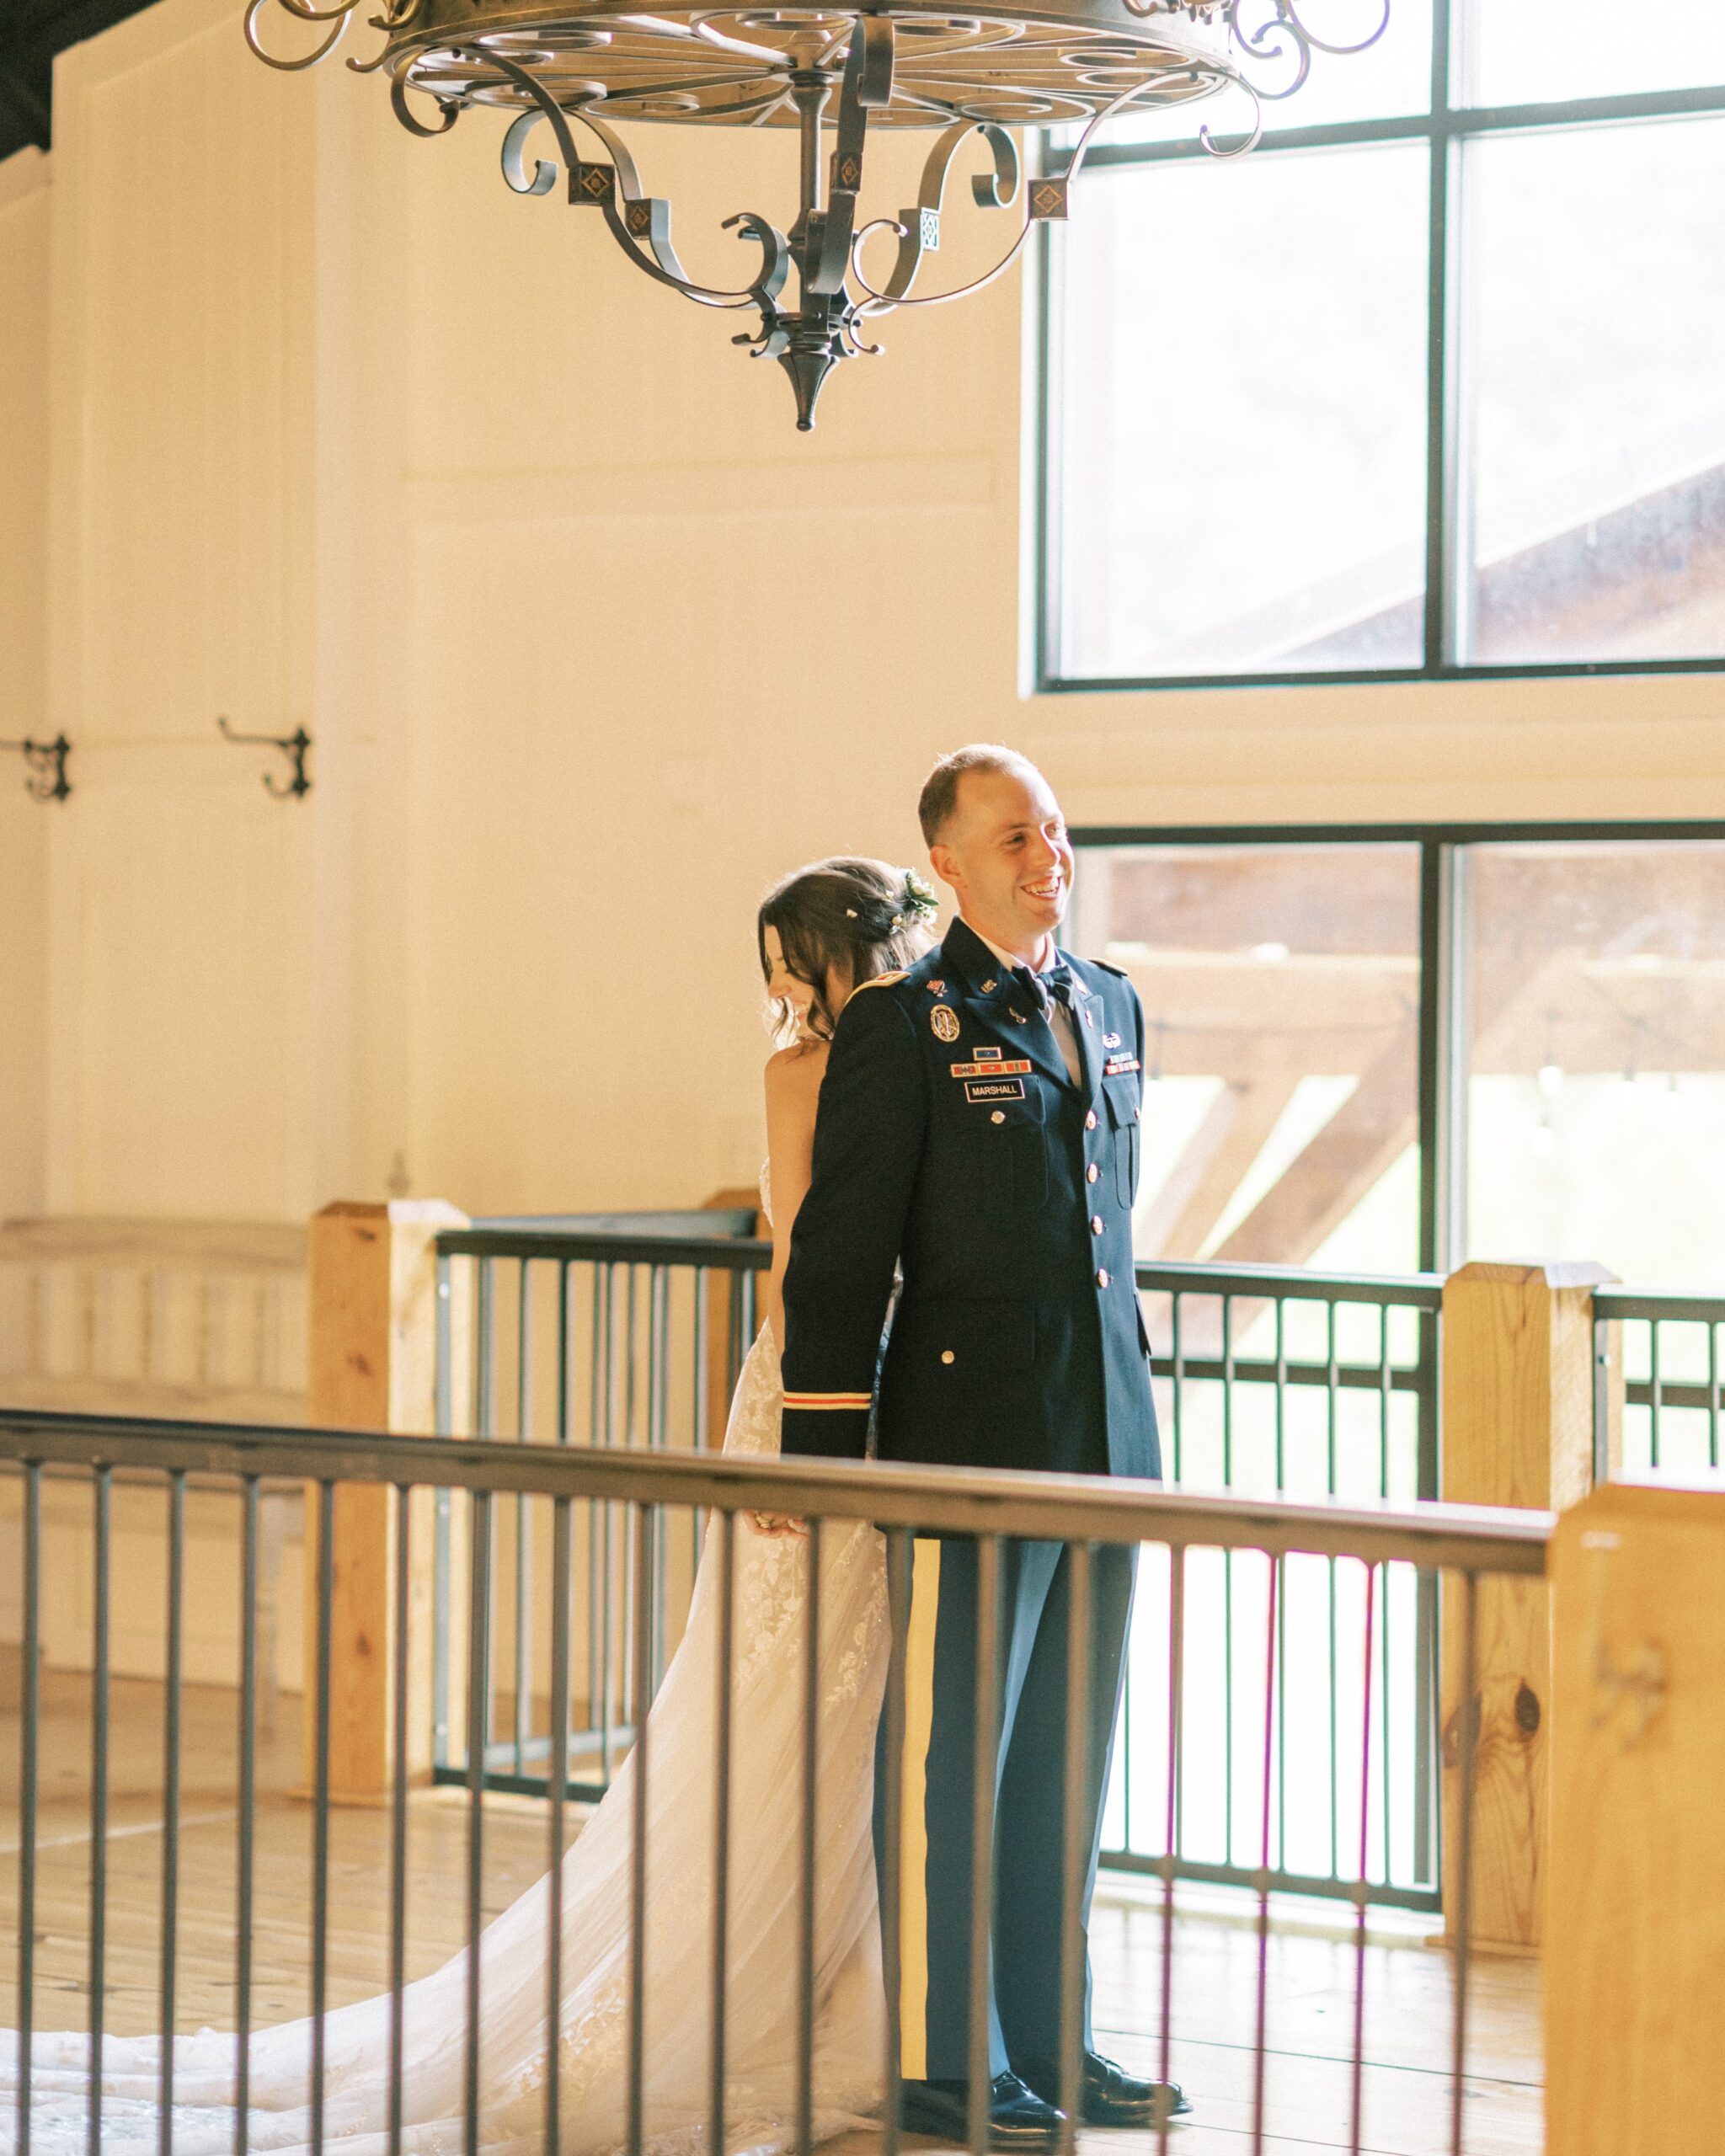 A military groom and his bride at The Vineyard Hall - A Rustic Wedding Venue